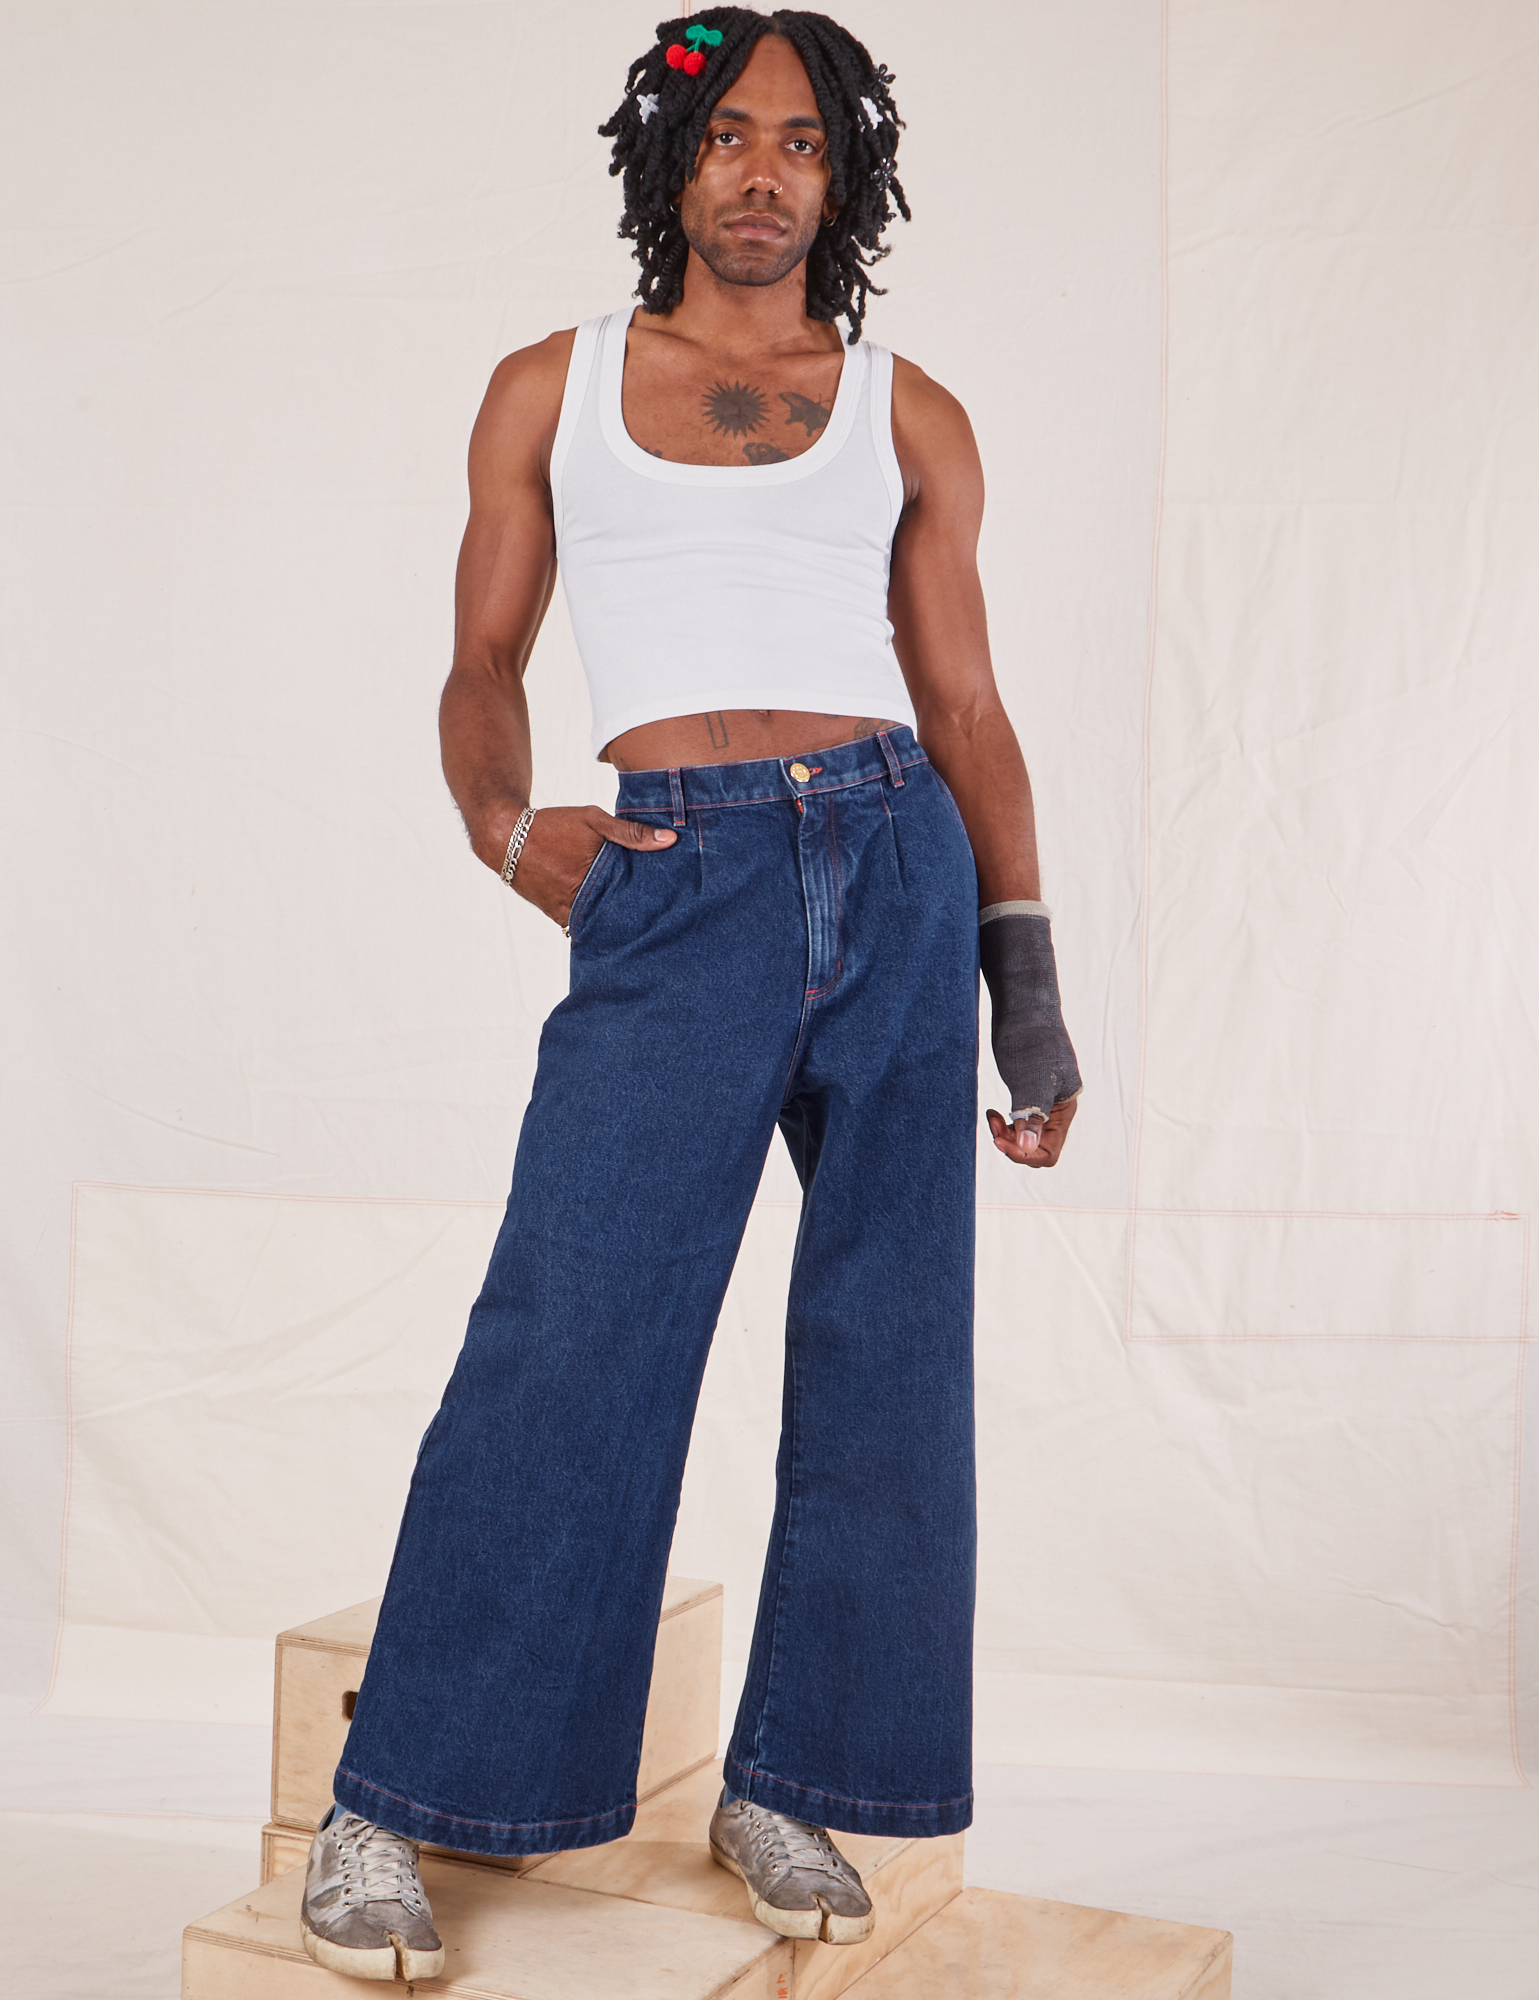 Jerrod is 6&#39;3&quot; and wearing S Indigo Wide Leg Trousers in Dark Wash paired with vintage off-white Cropped Tank Top